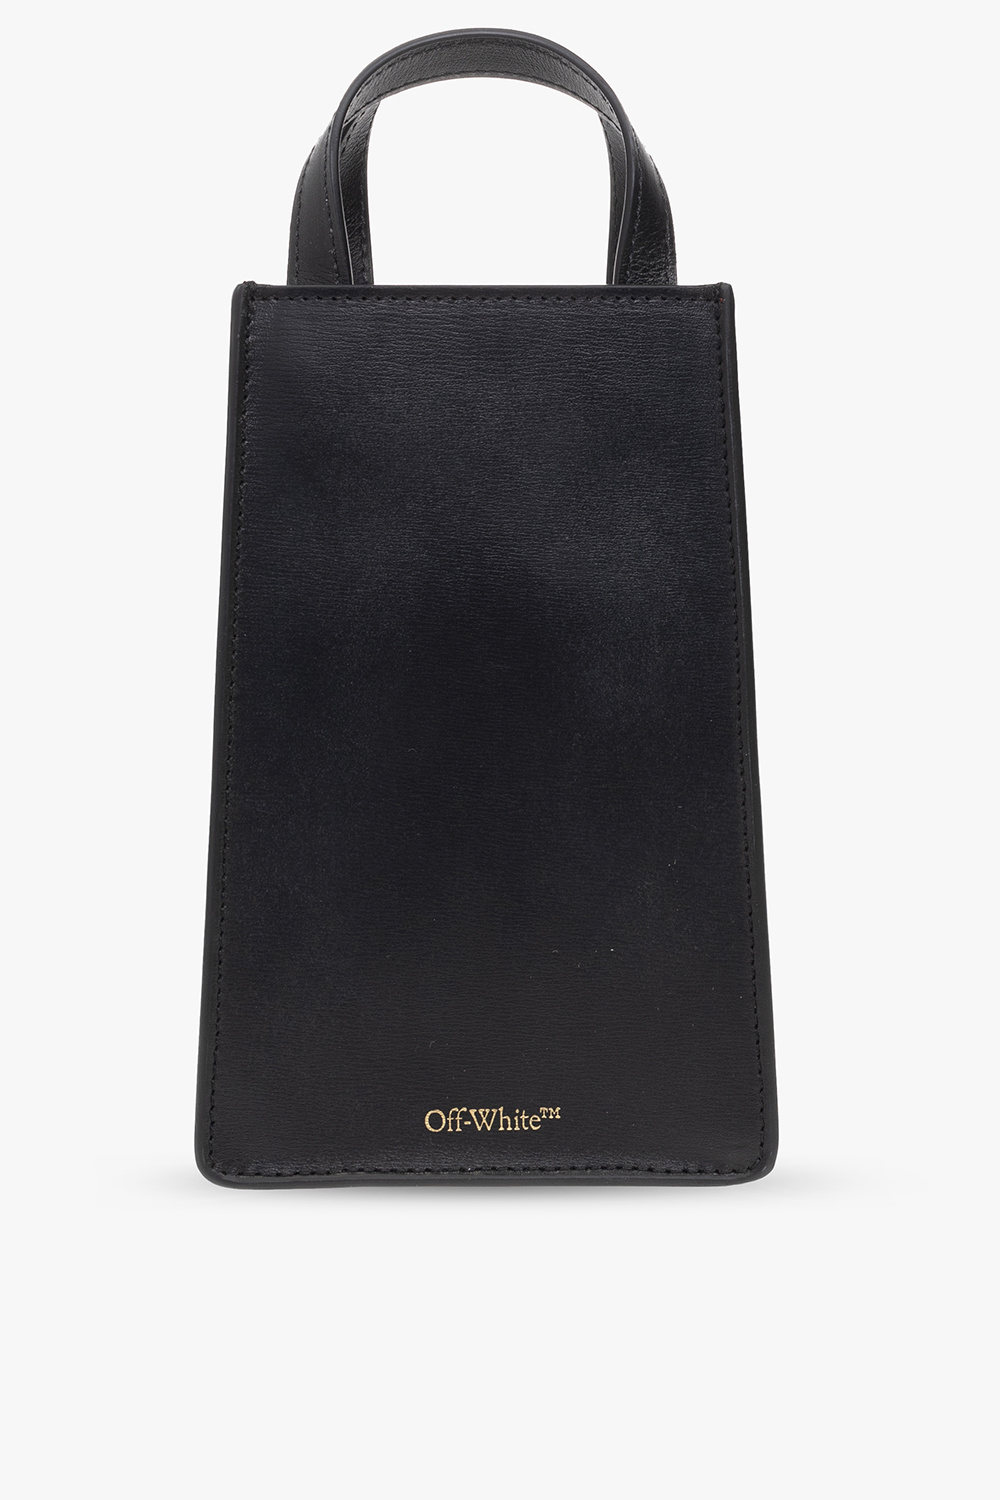 Off-White ‘Jitney’ card holder with strap